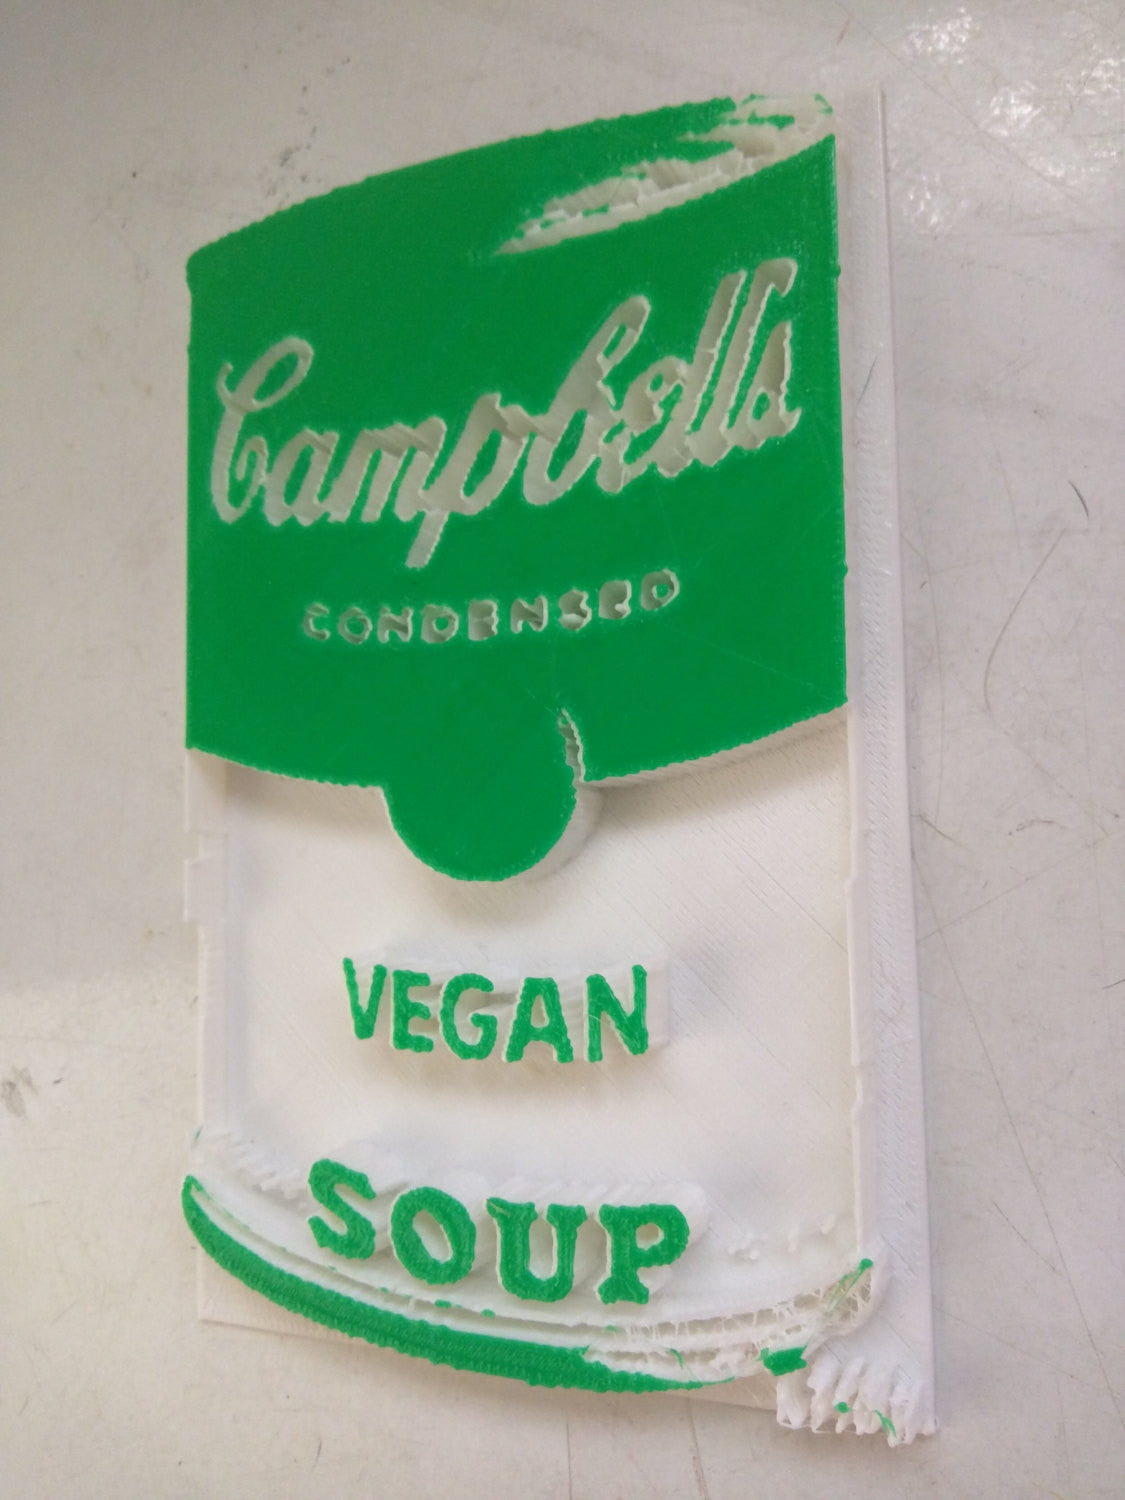 3D printed Campbell's Vegan Soup Green & White by L3f0u